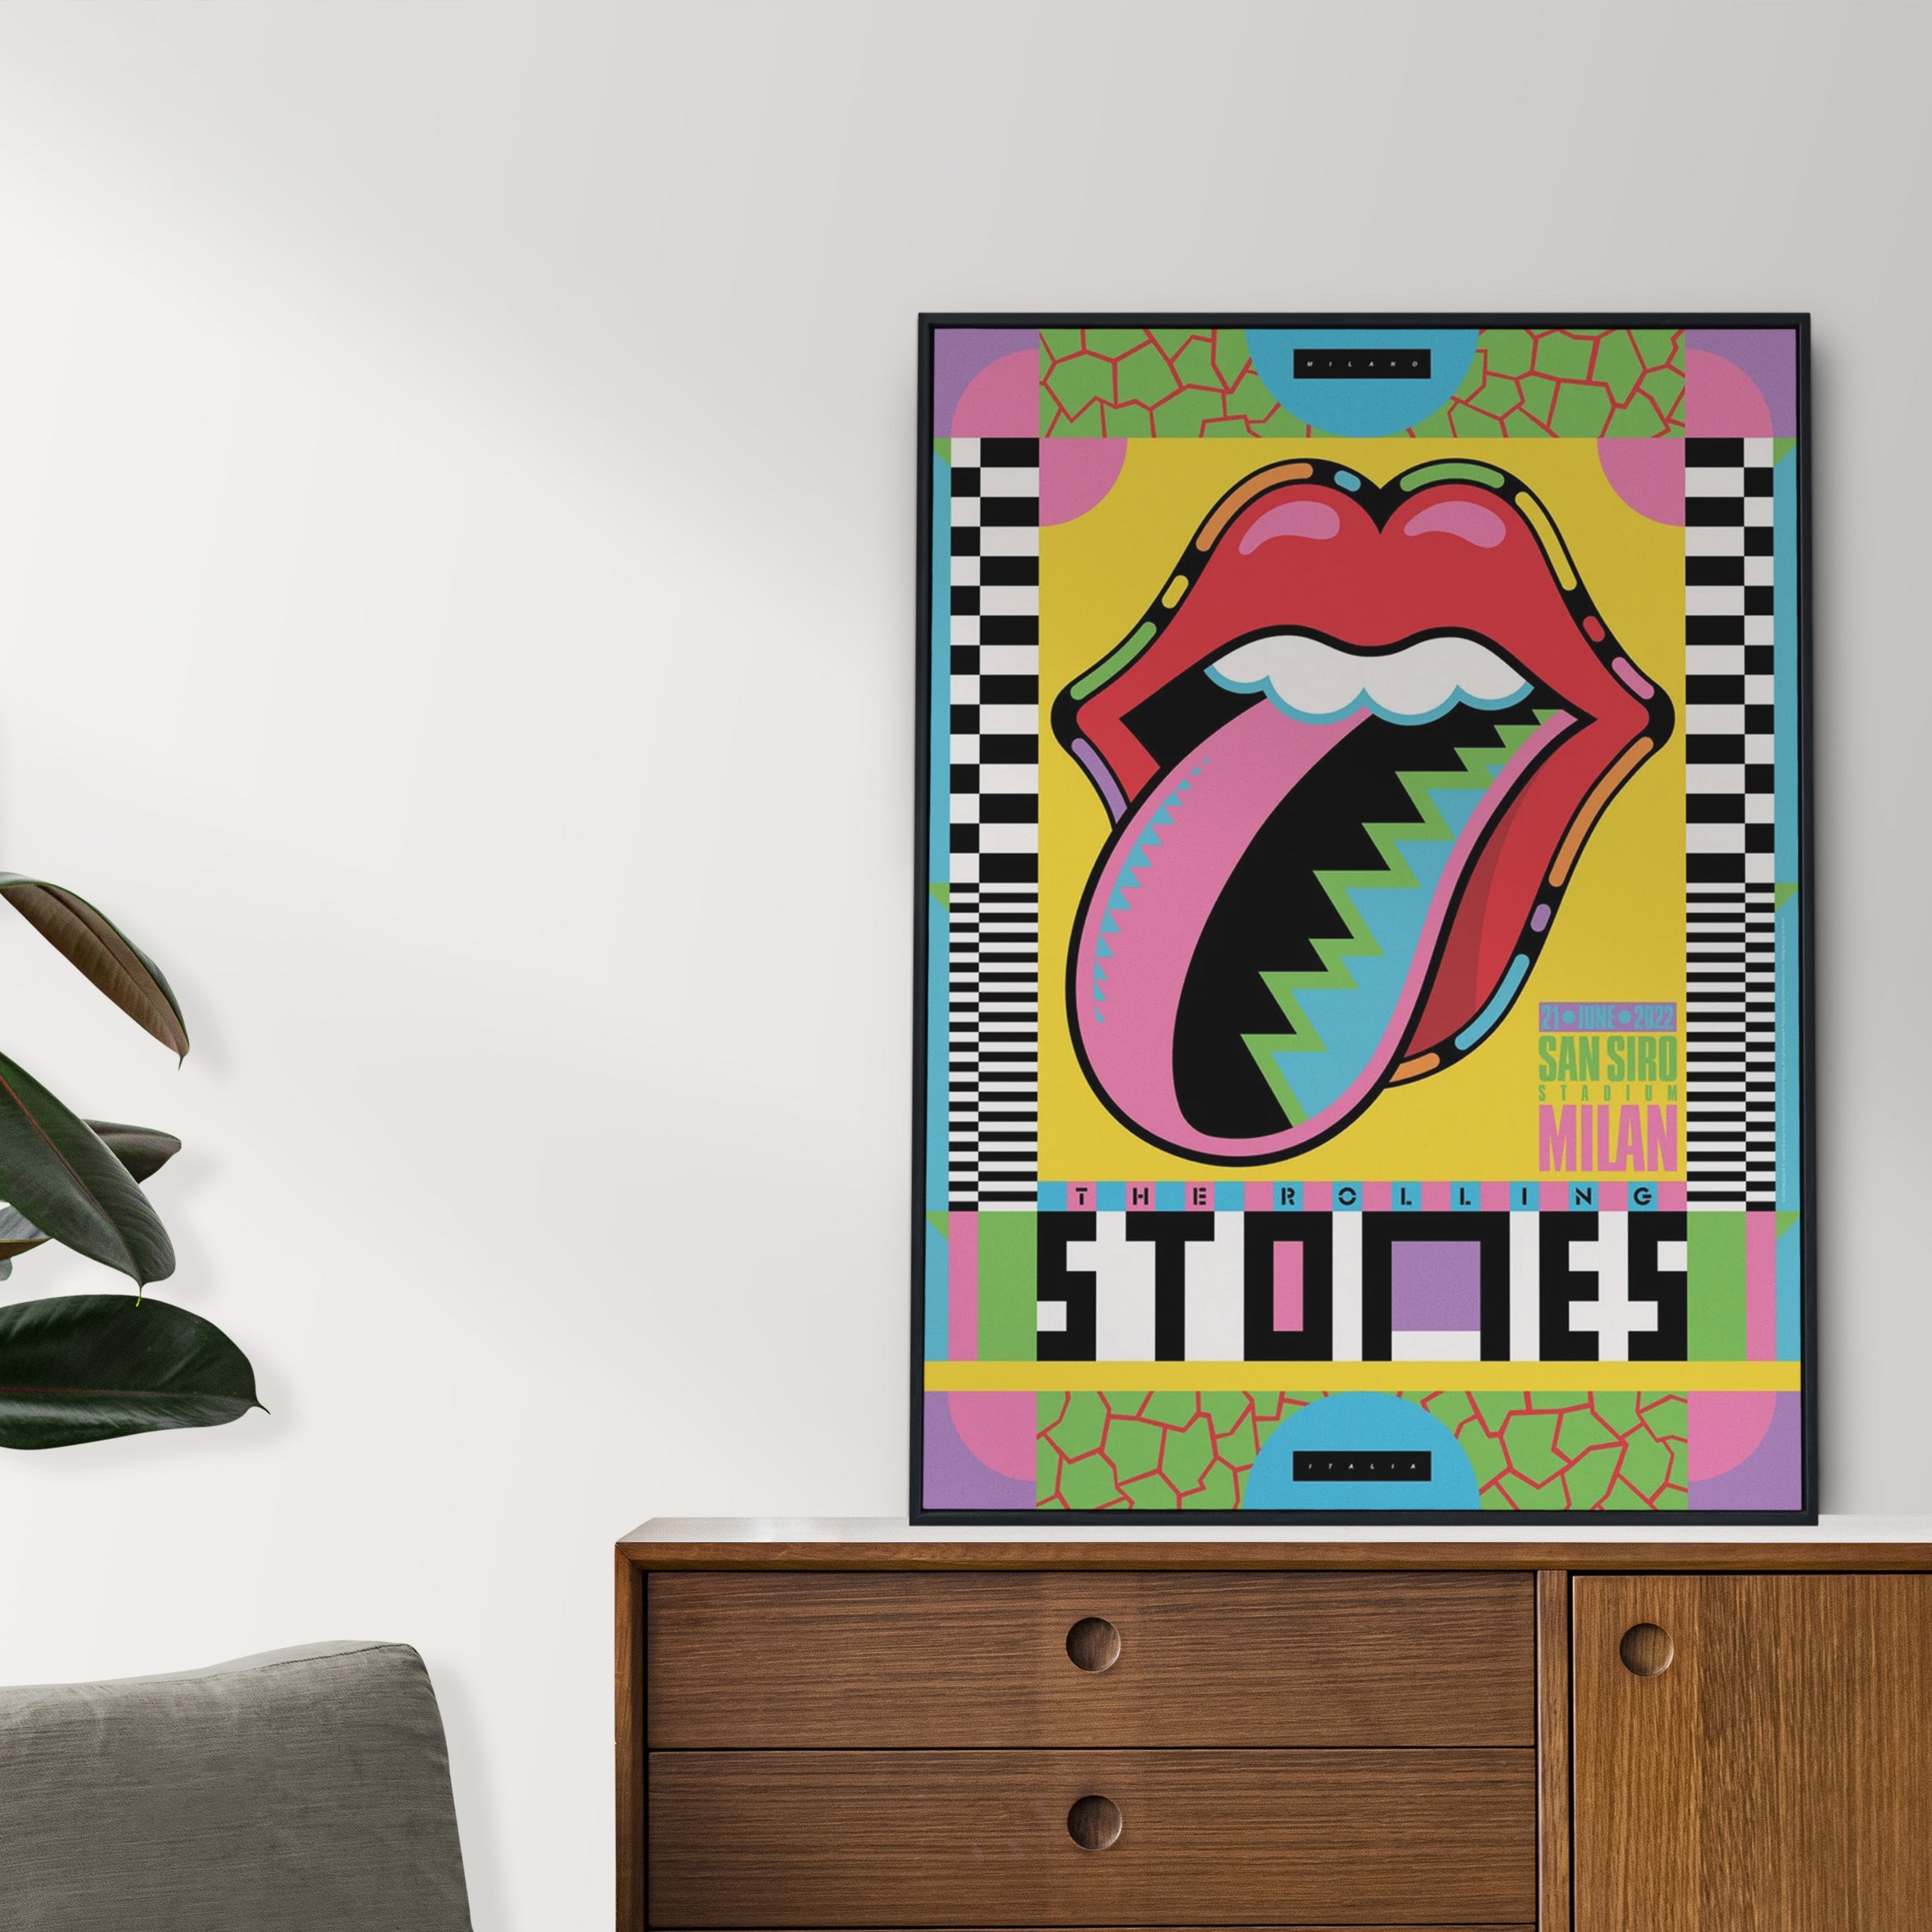 The Rolling Stones It's Only Rock n Roll Impression D'art 60x80cm, Posters  et affiches